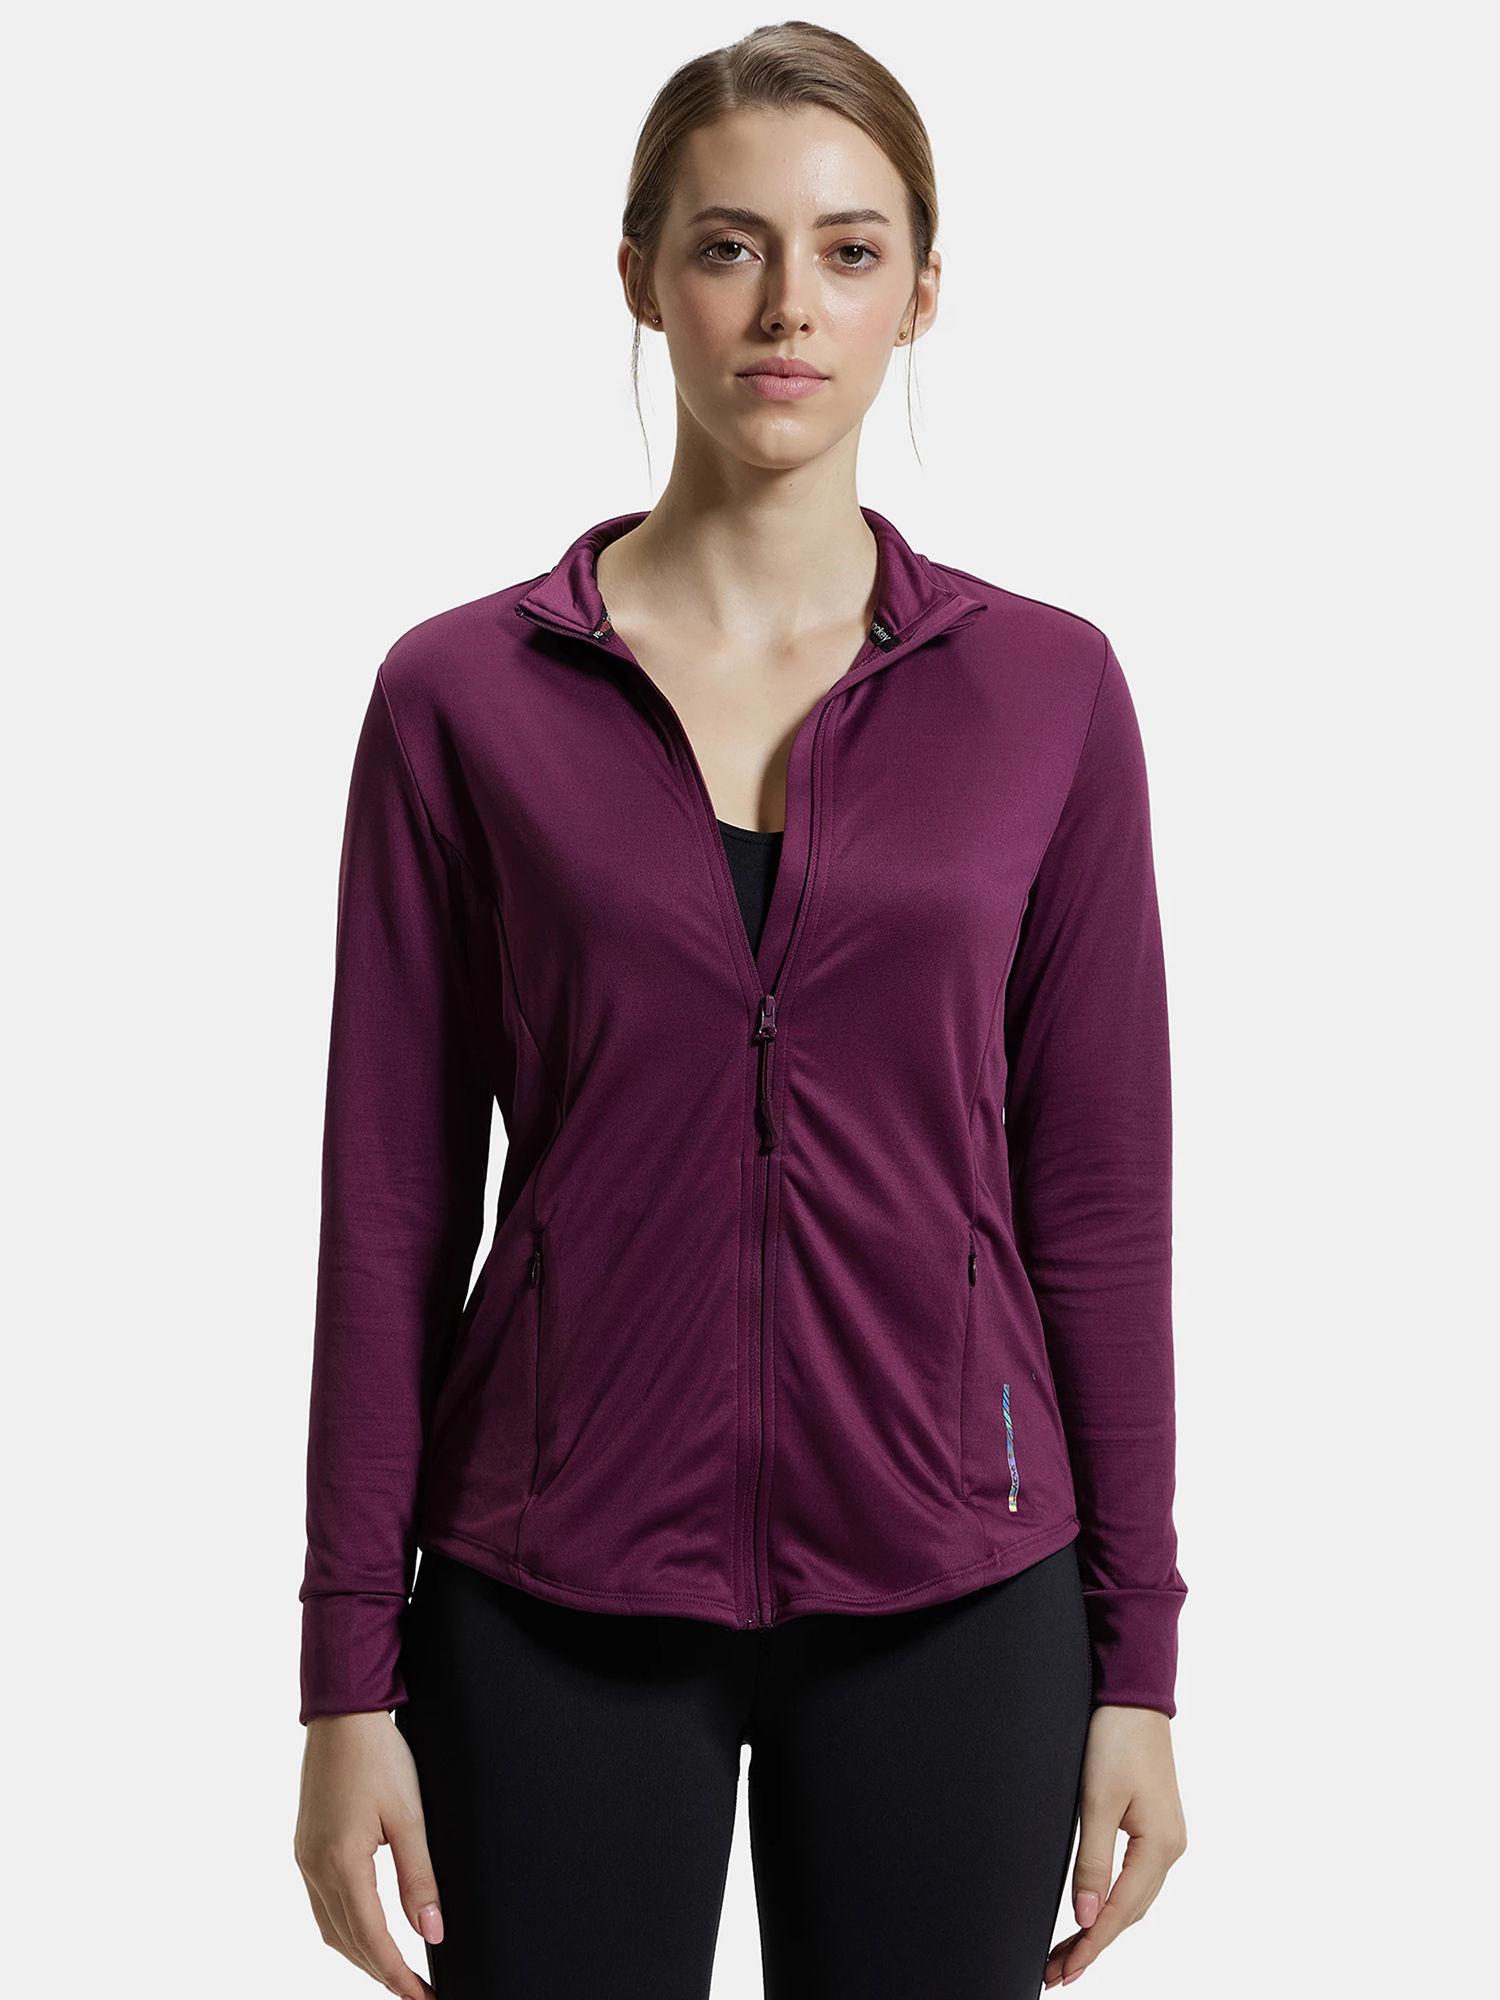 mw67-women's-microfiber-relaxed-fit-jacket-with-curved-back-hem---grape-wine